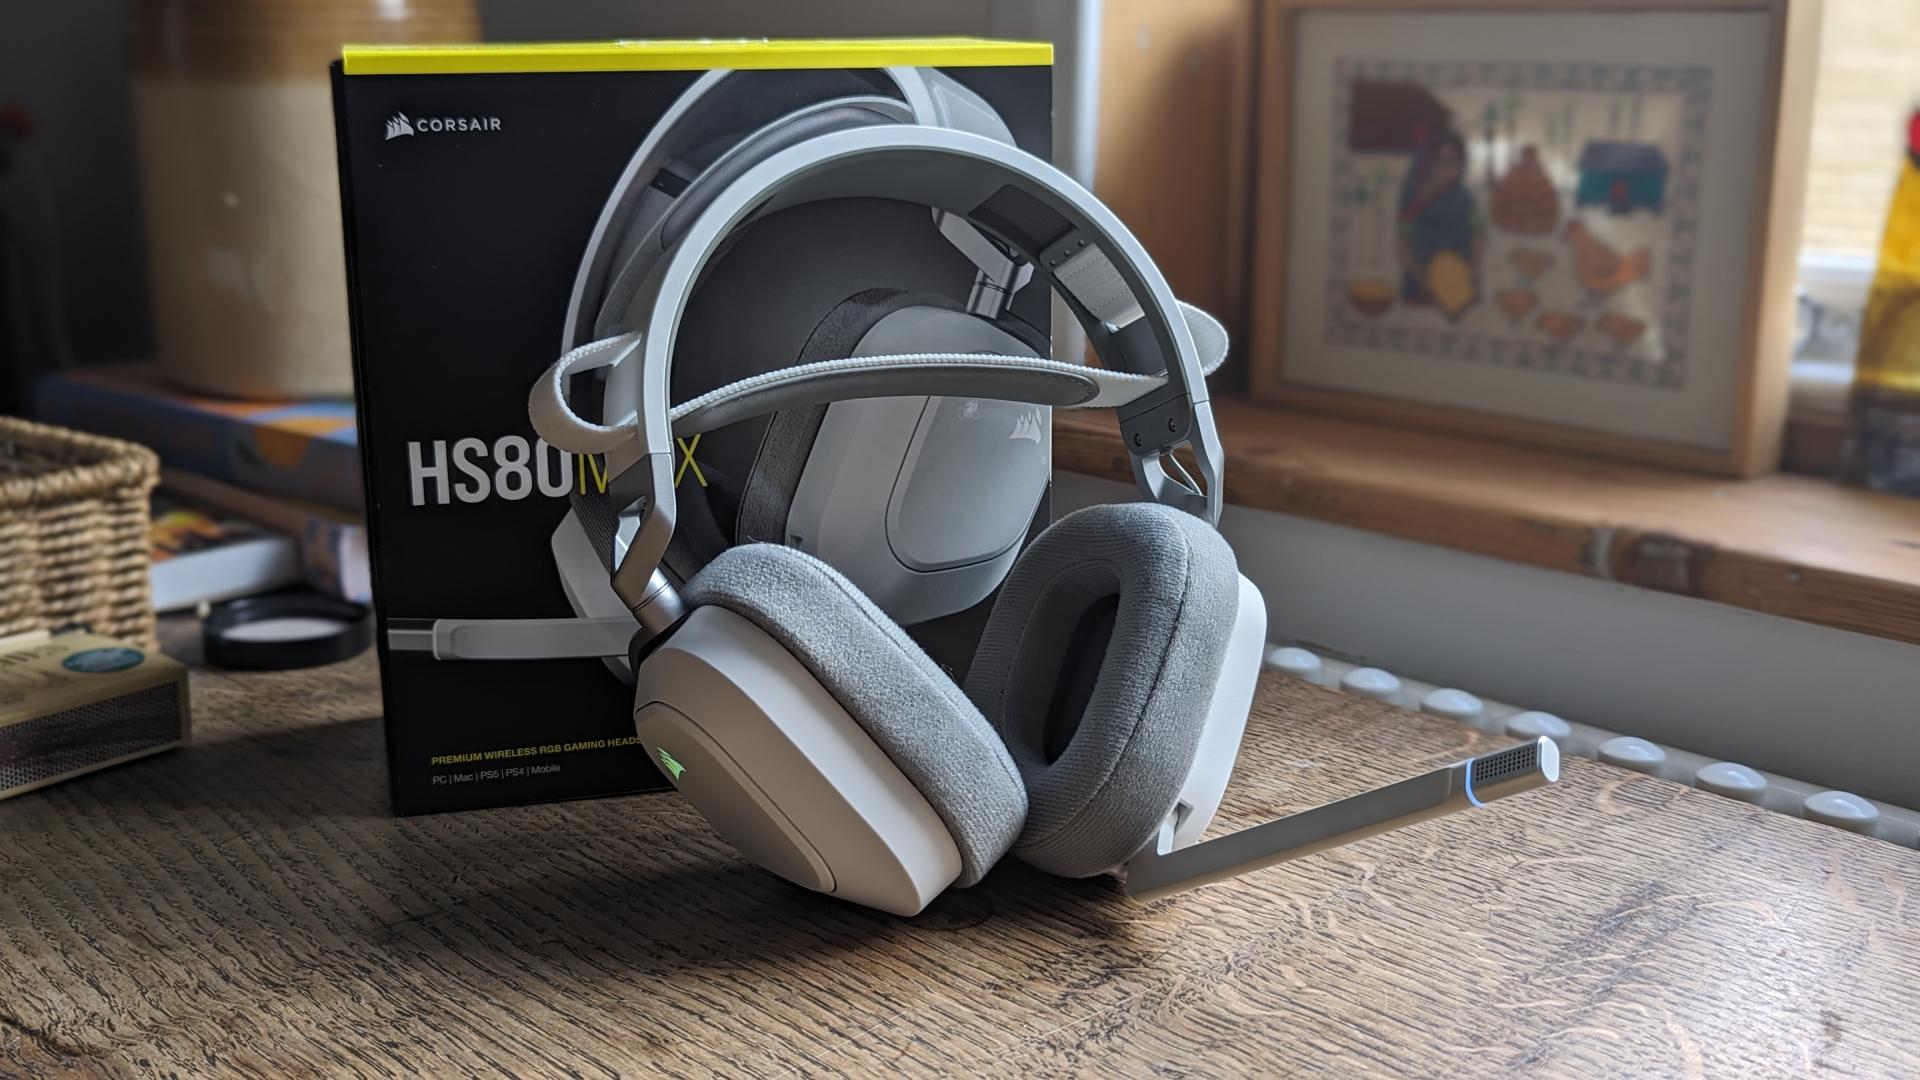 Corsair HS80 Max review: A terrific gaming headset with amazing